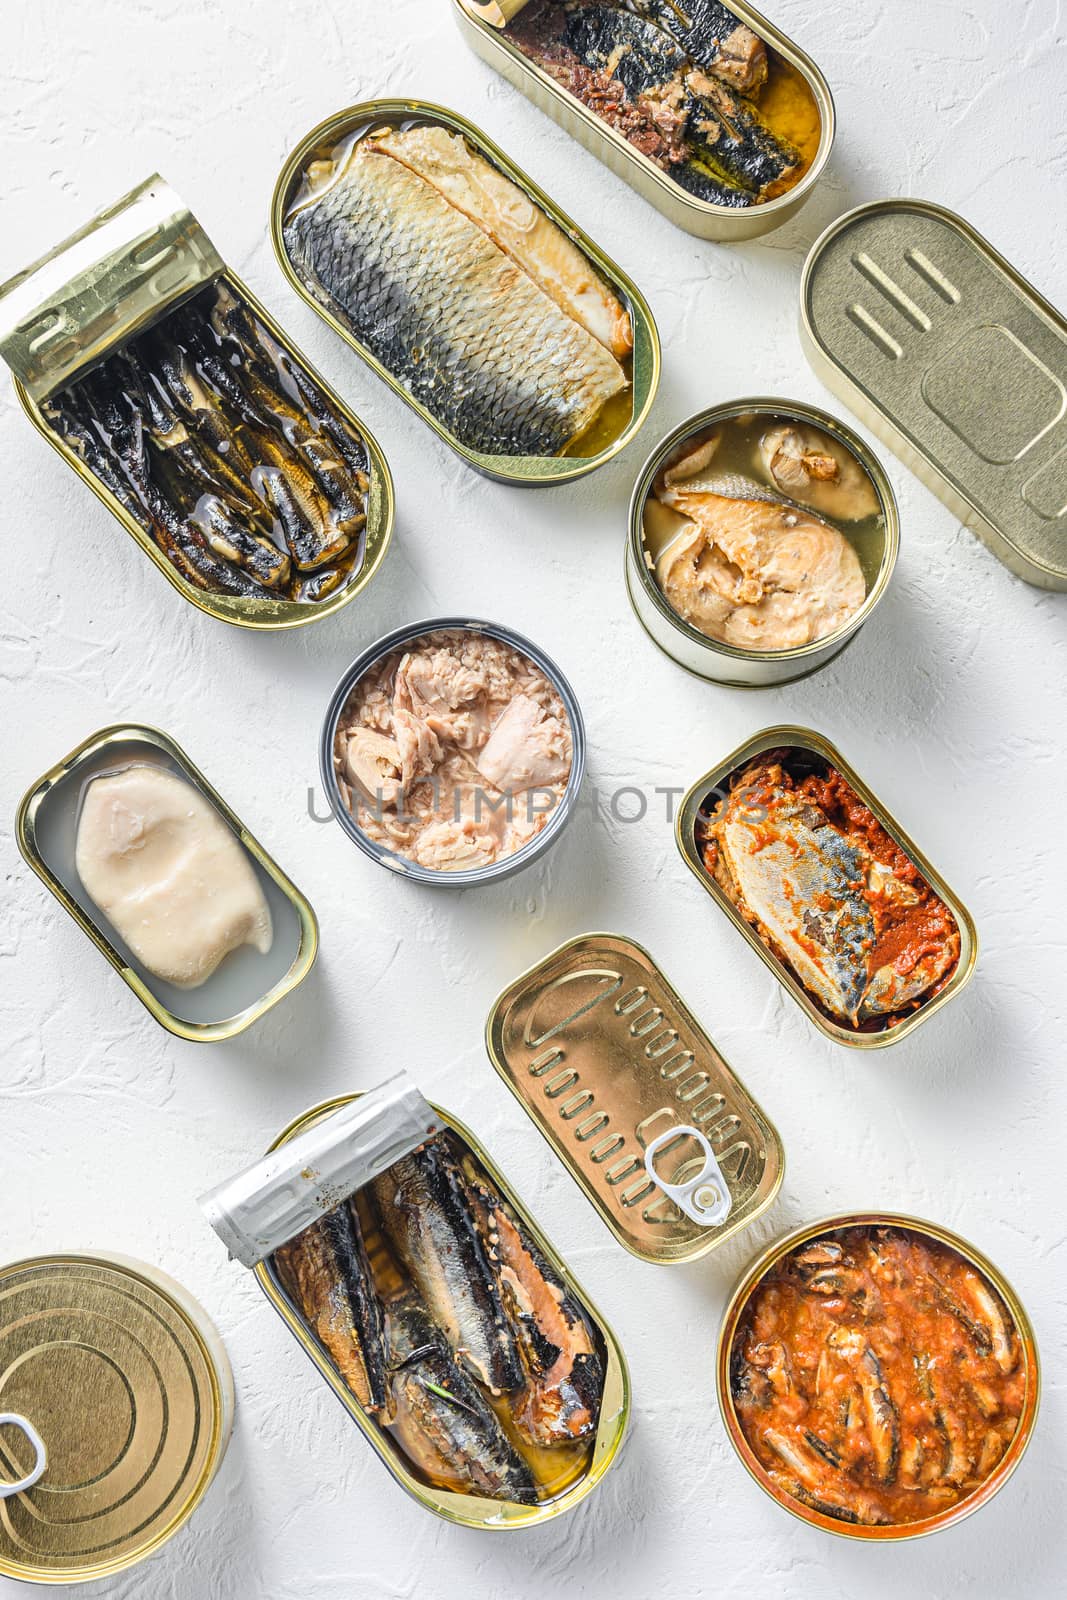 Tin can of fish and seafood, opened and closed cans with Saury, mackerel, sprats, sardines, pilchard, squid, tuna, over white background surface top view .